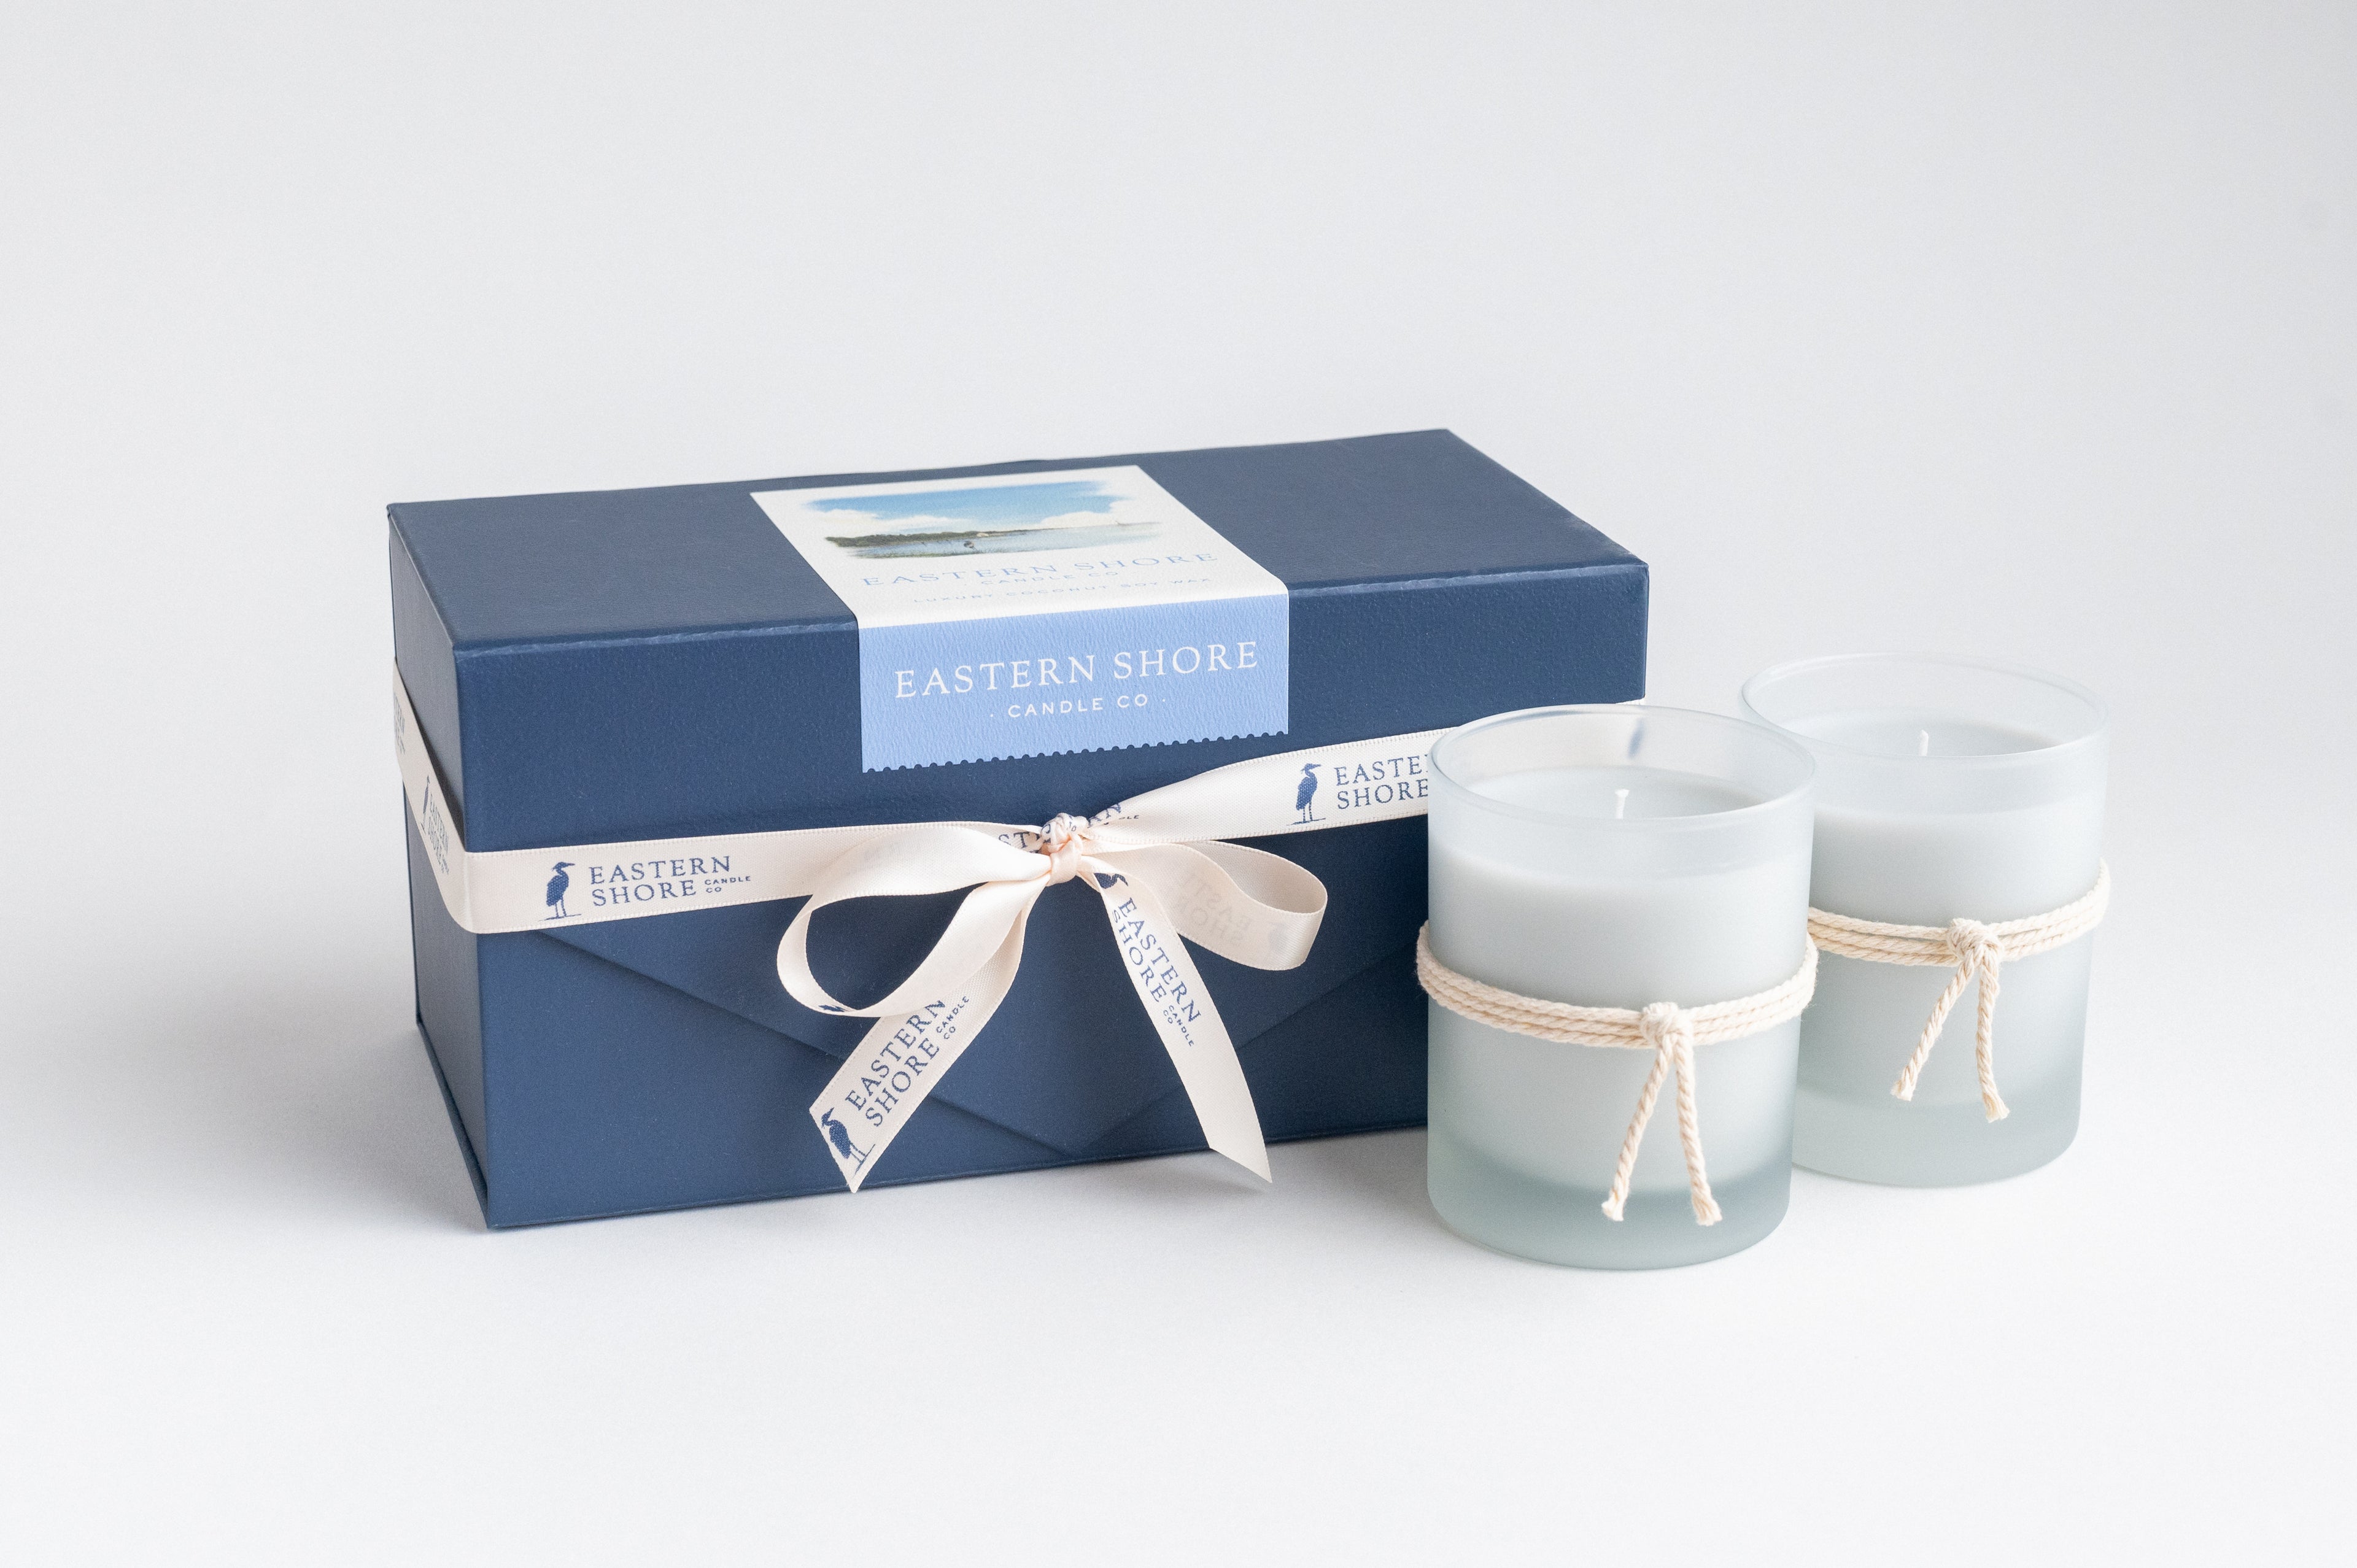 Heron gift set, eastern shore gift set, eastern shore candle gift set, floral scent, holiday gift set, Scented candle, coconut soy wax, coastal candle, eastern shore, Chesapeake Bay, luxury candle, hand-poured, Maryland, Virginia